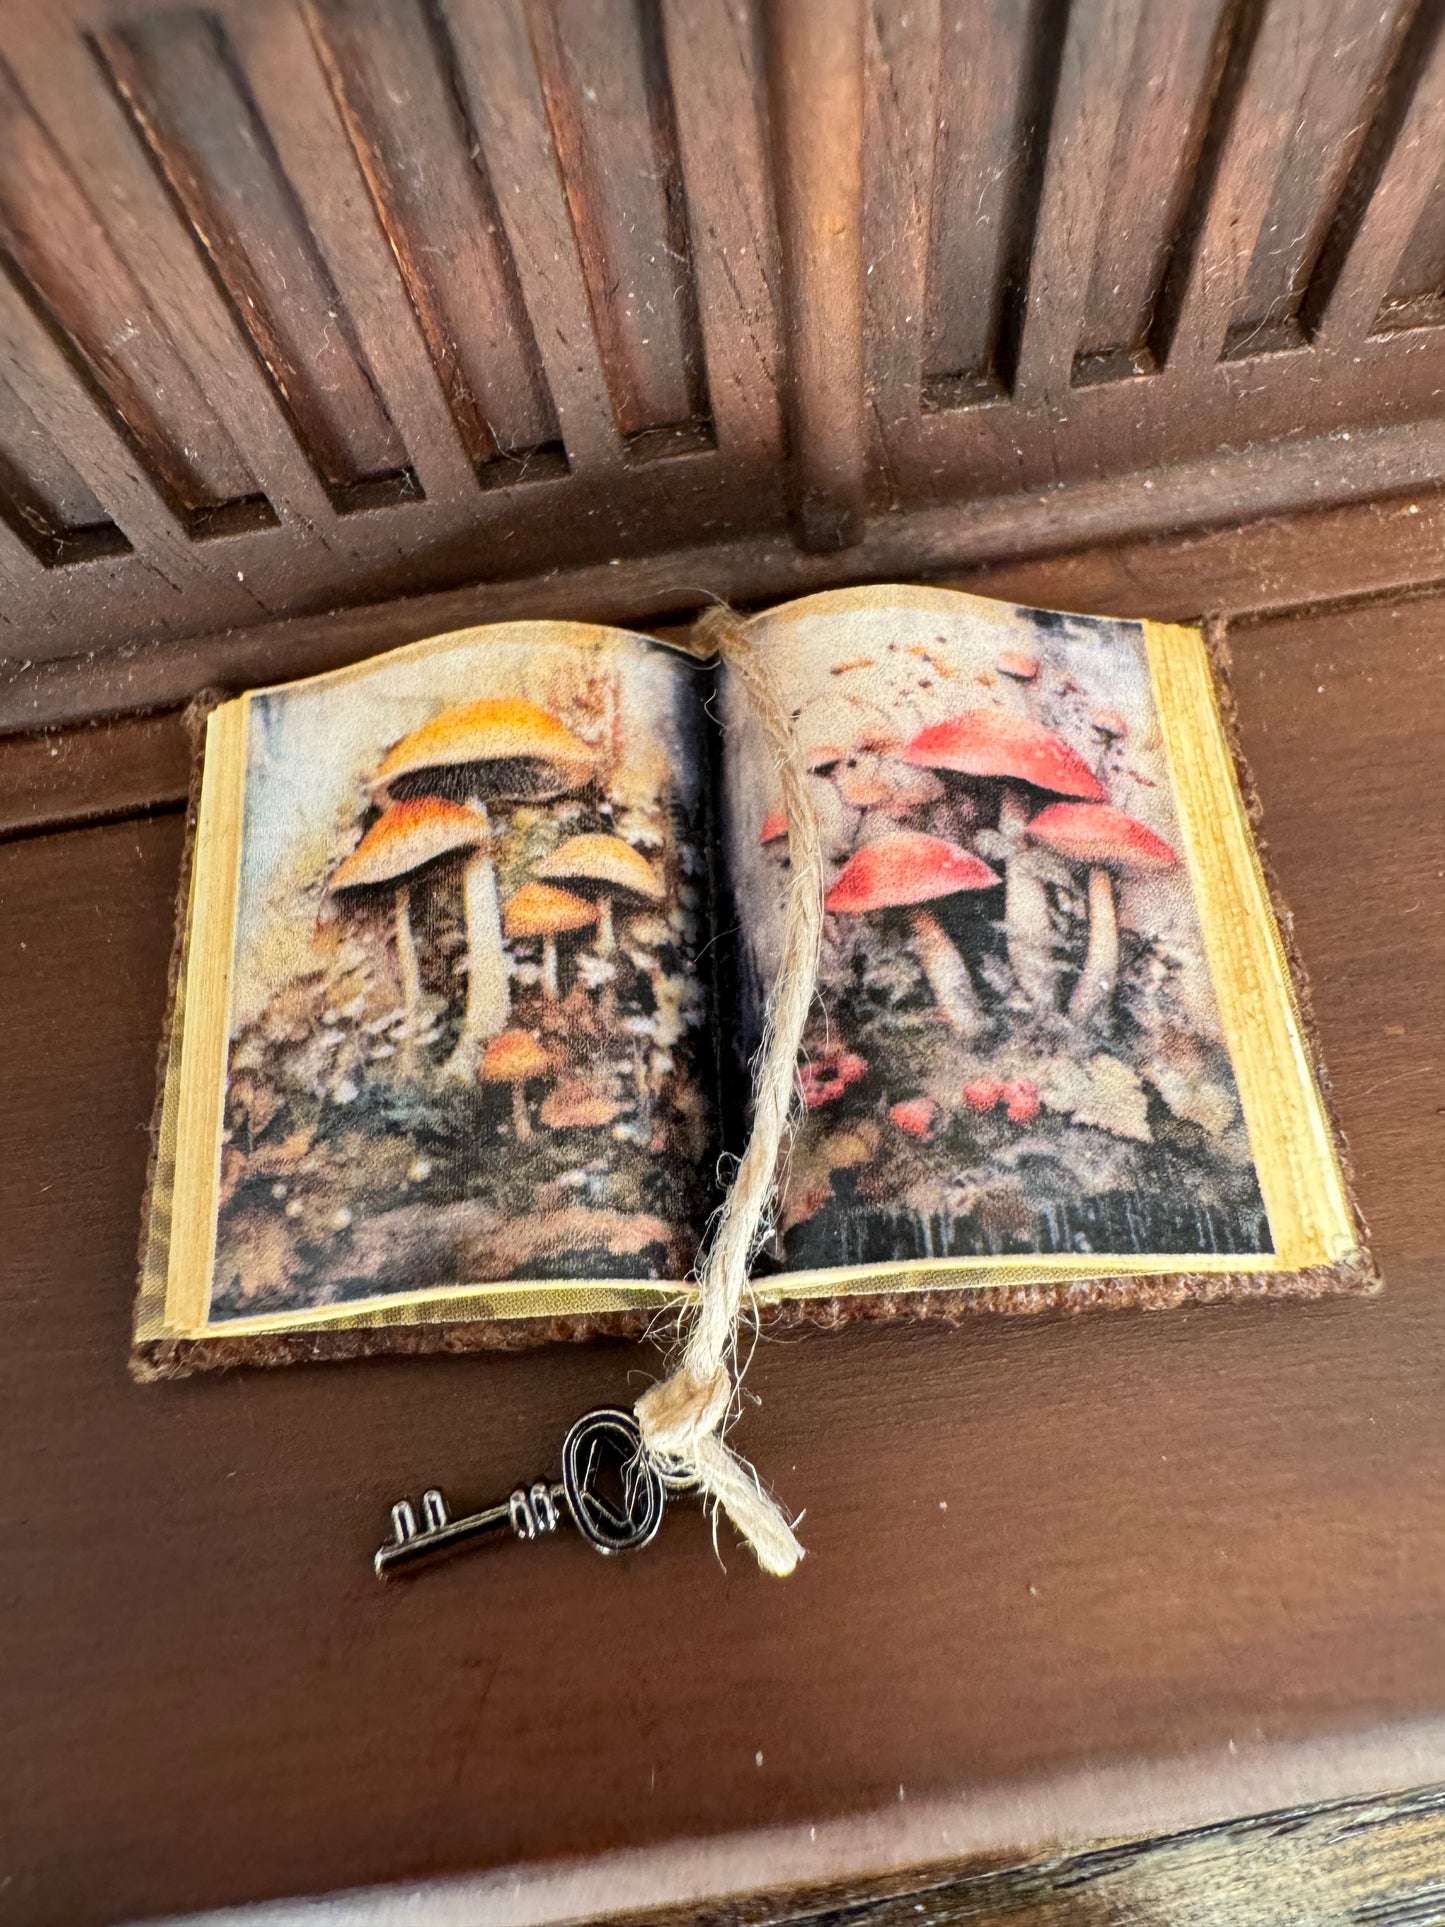 Red and Yellow Mushroom Open Book - 1:12 Scale